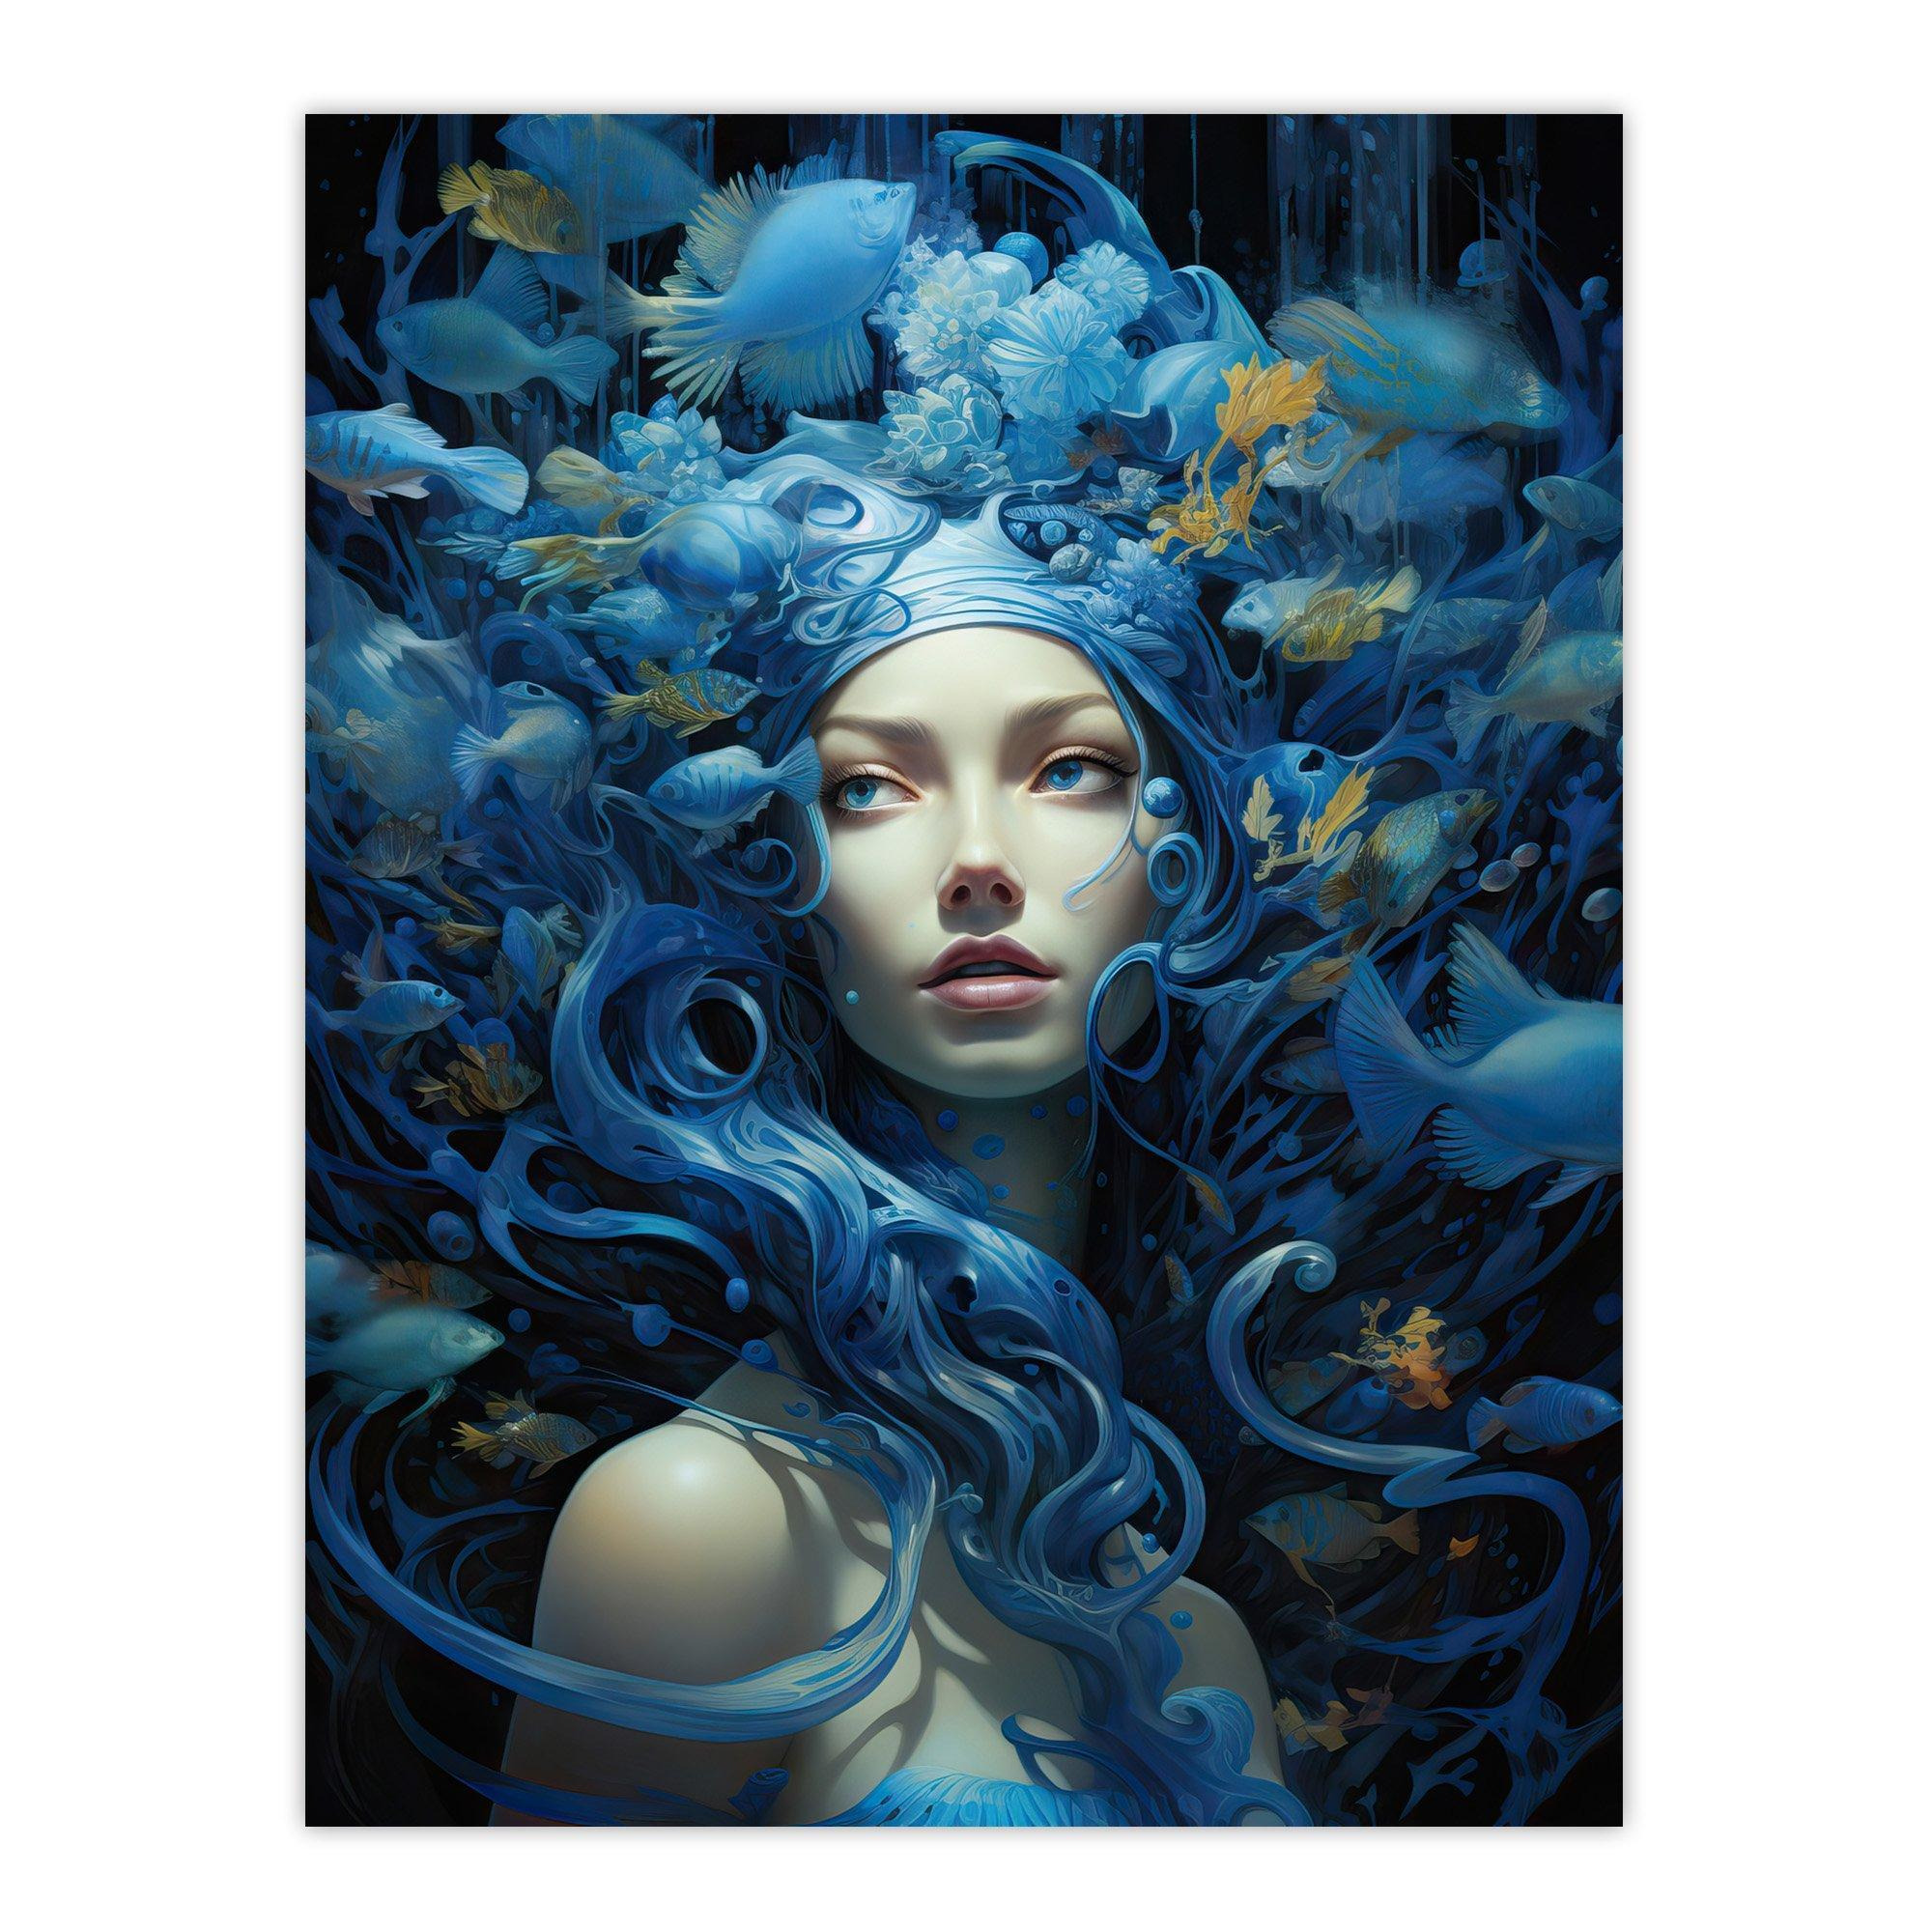 Goddess Of The Sea Mermaid Lore Concept Striking Artwork In Blue Extra Large XL Unframed Wall Art Poster Print - image 1